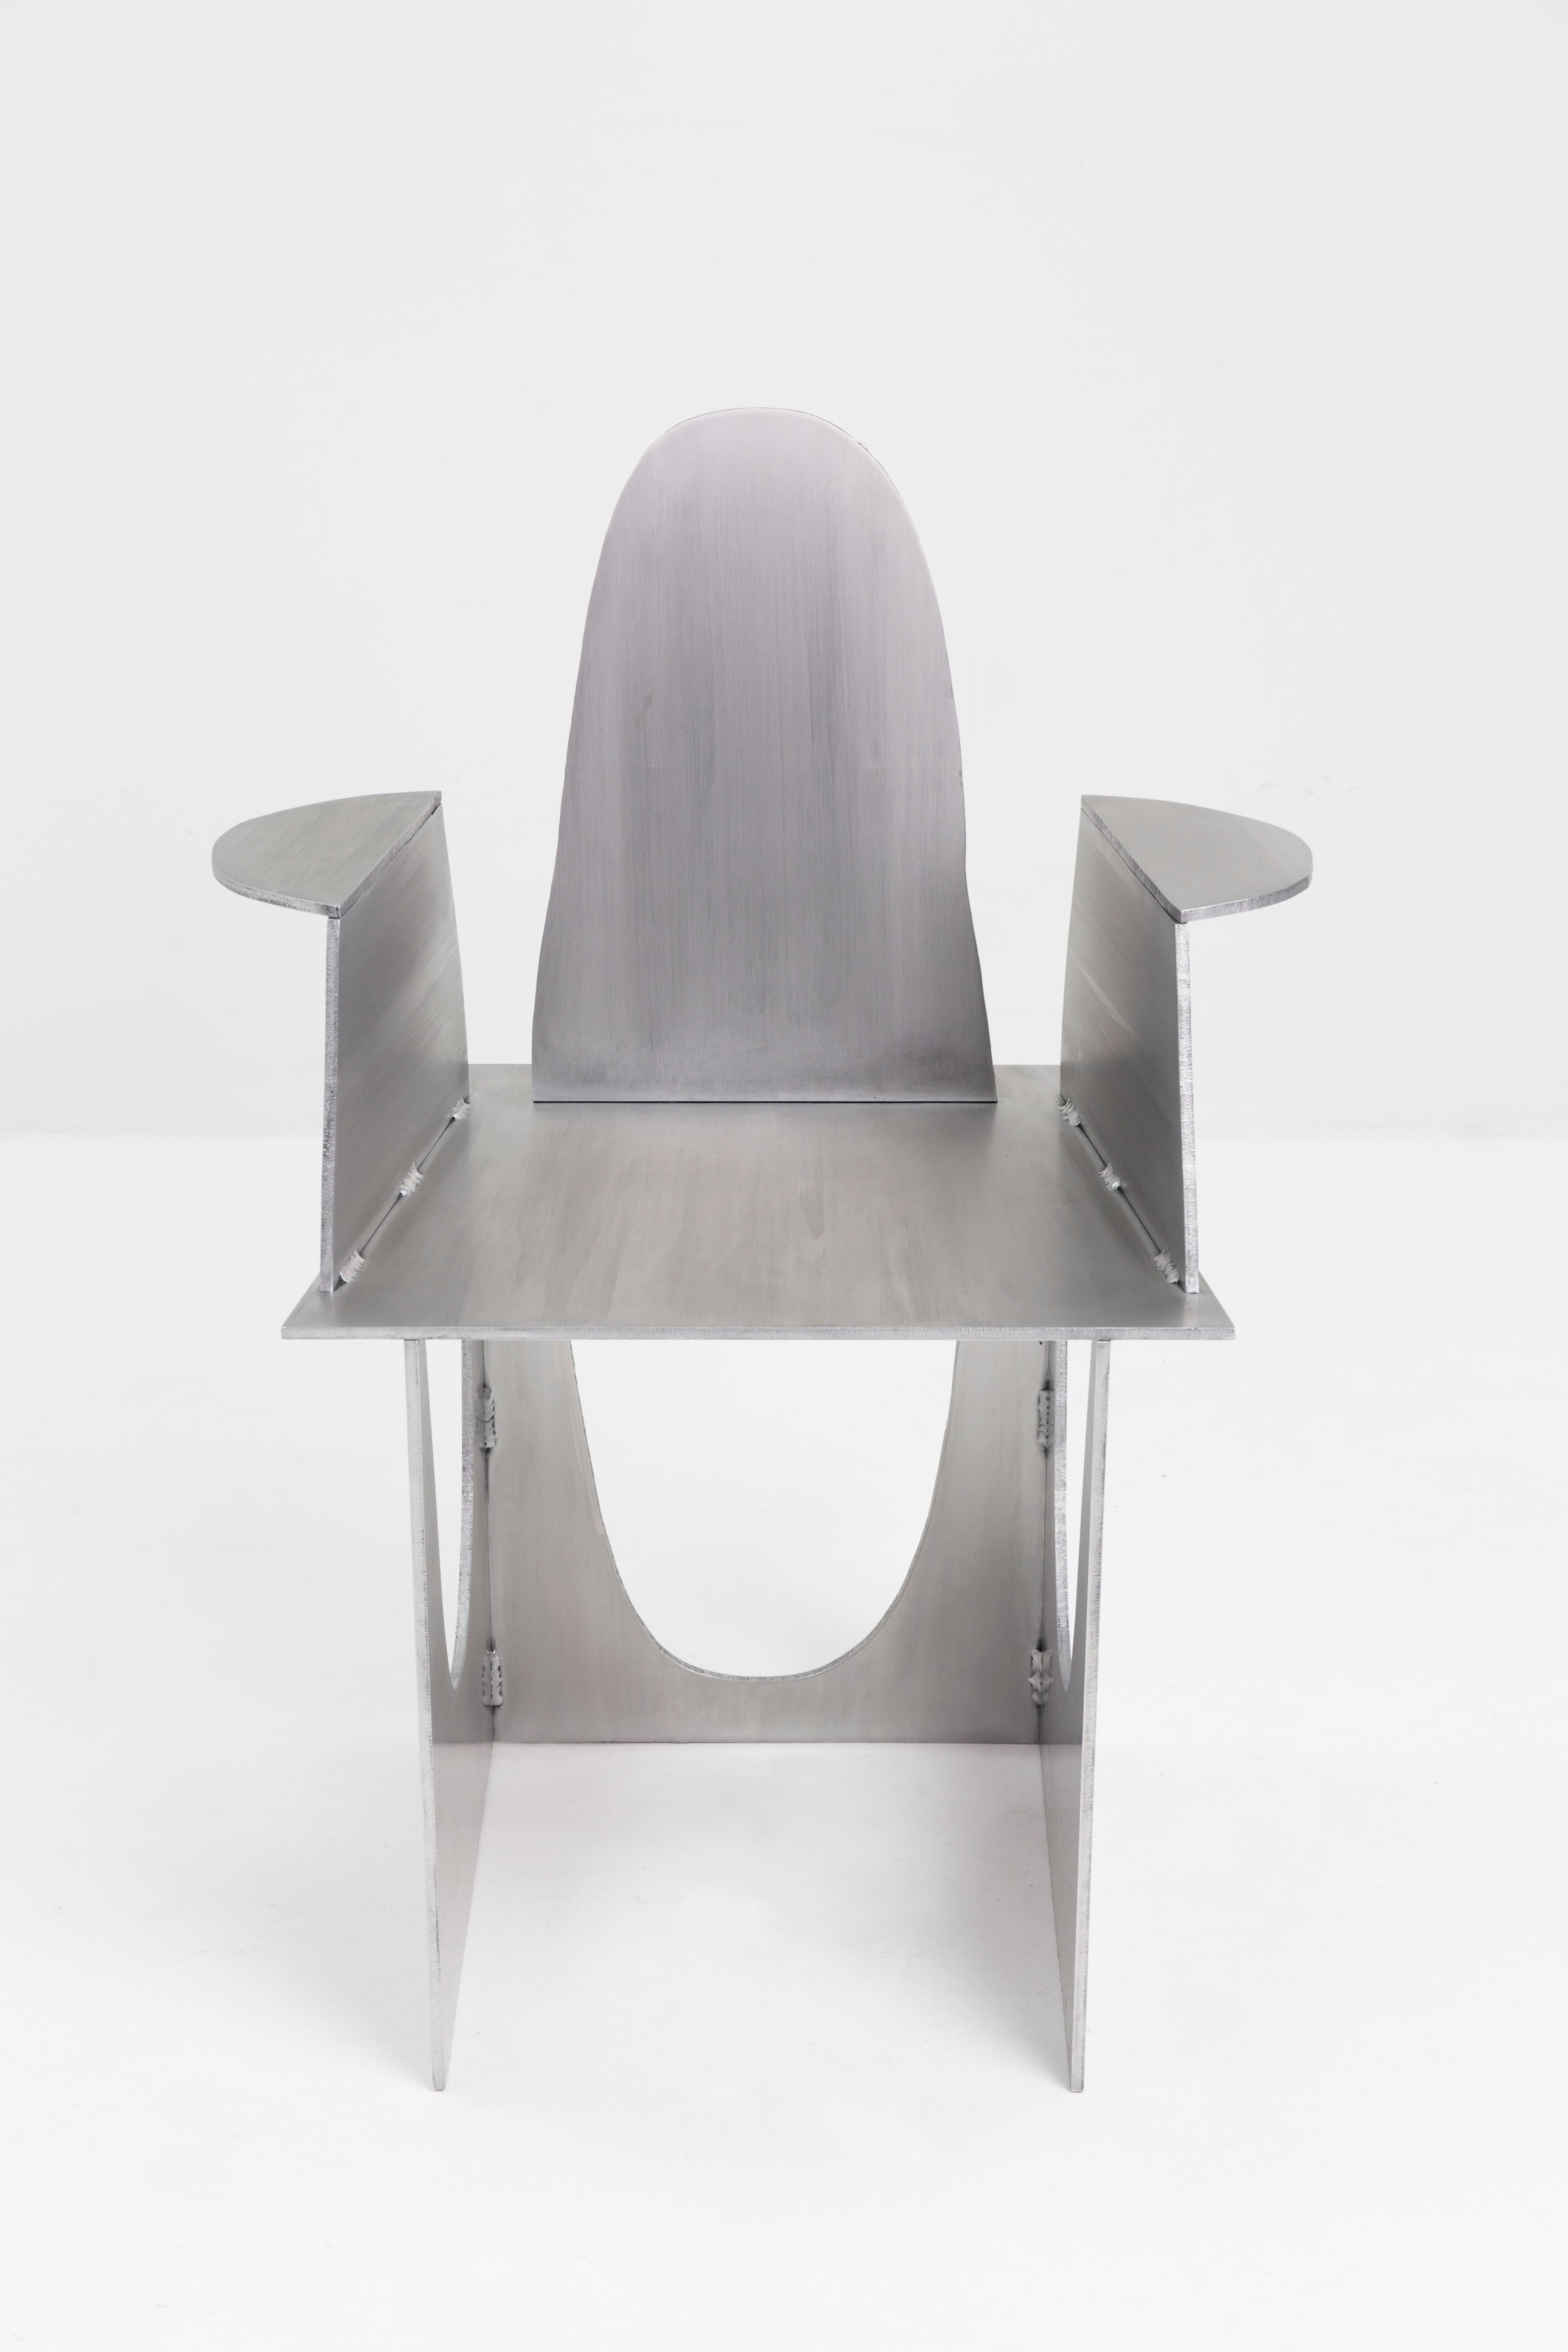 Aluminum rational jigsaw chair by Studio Julien Manaira
Dimensions: 65 x 46 x 94 cm
Materials: brushed and waxed aluminum


The intention behind this project is to highlight the traces from the actions of the maker. In this sense, the choice of